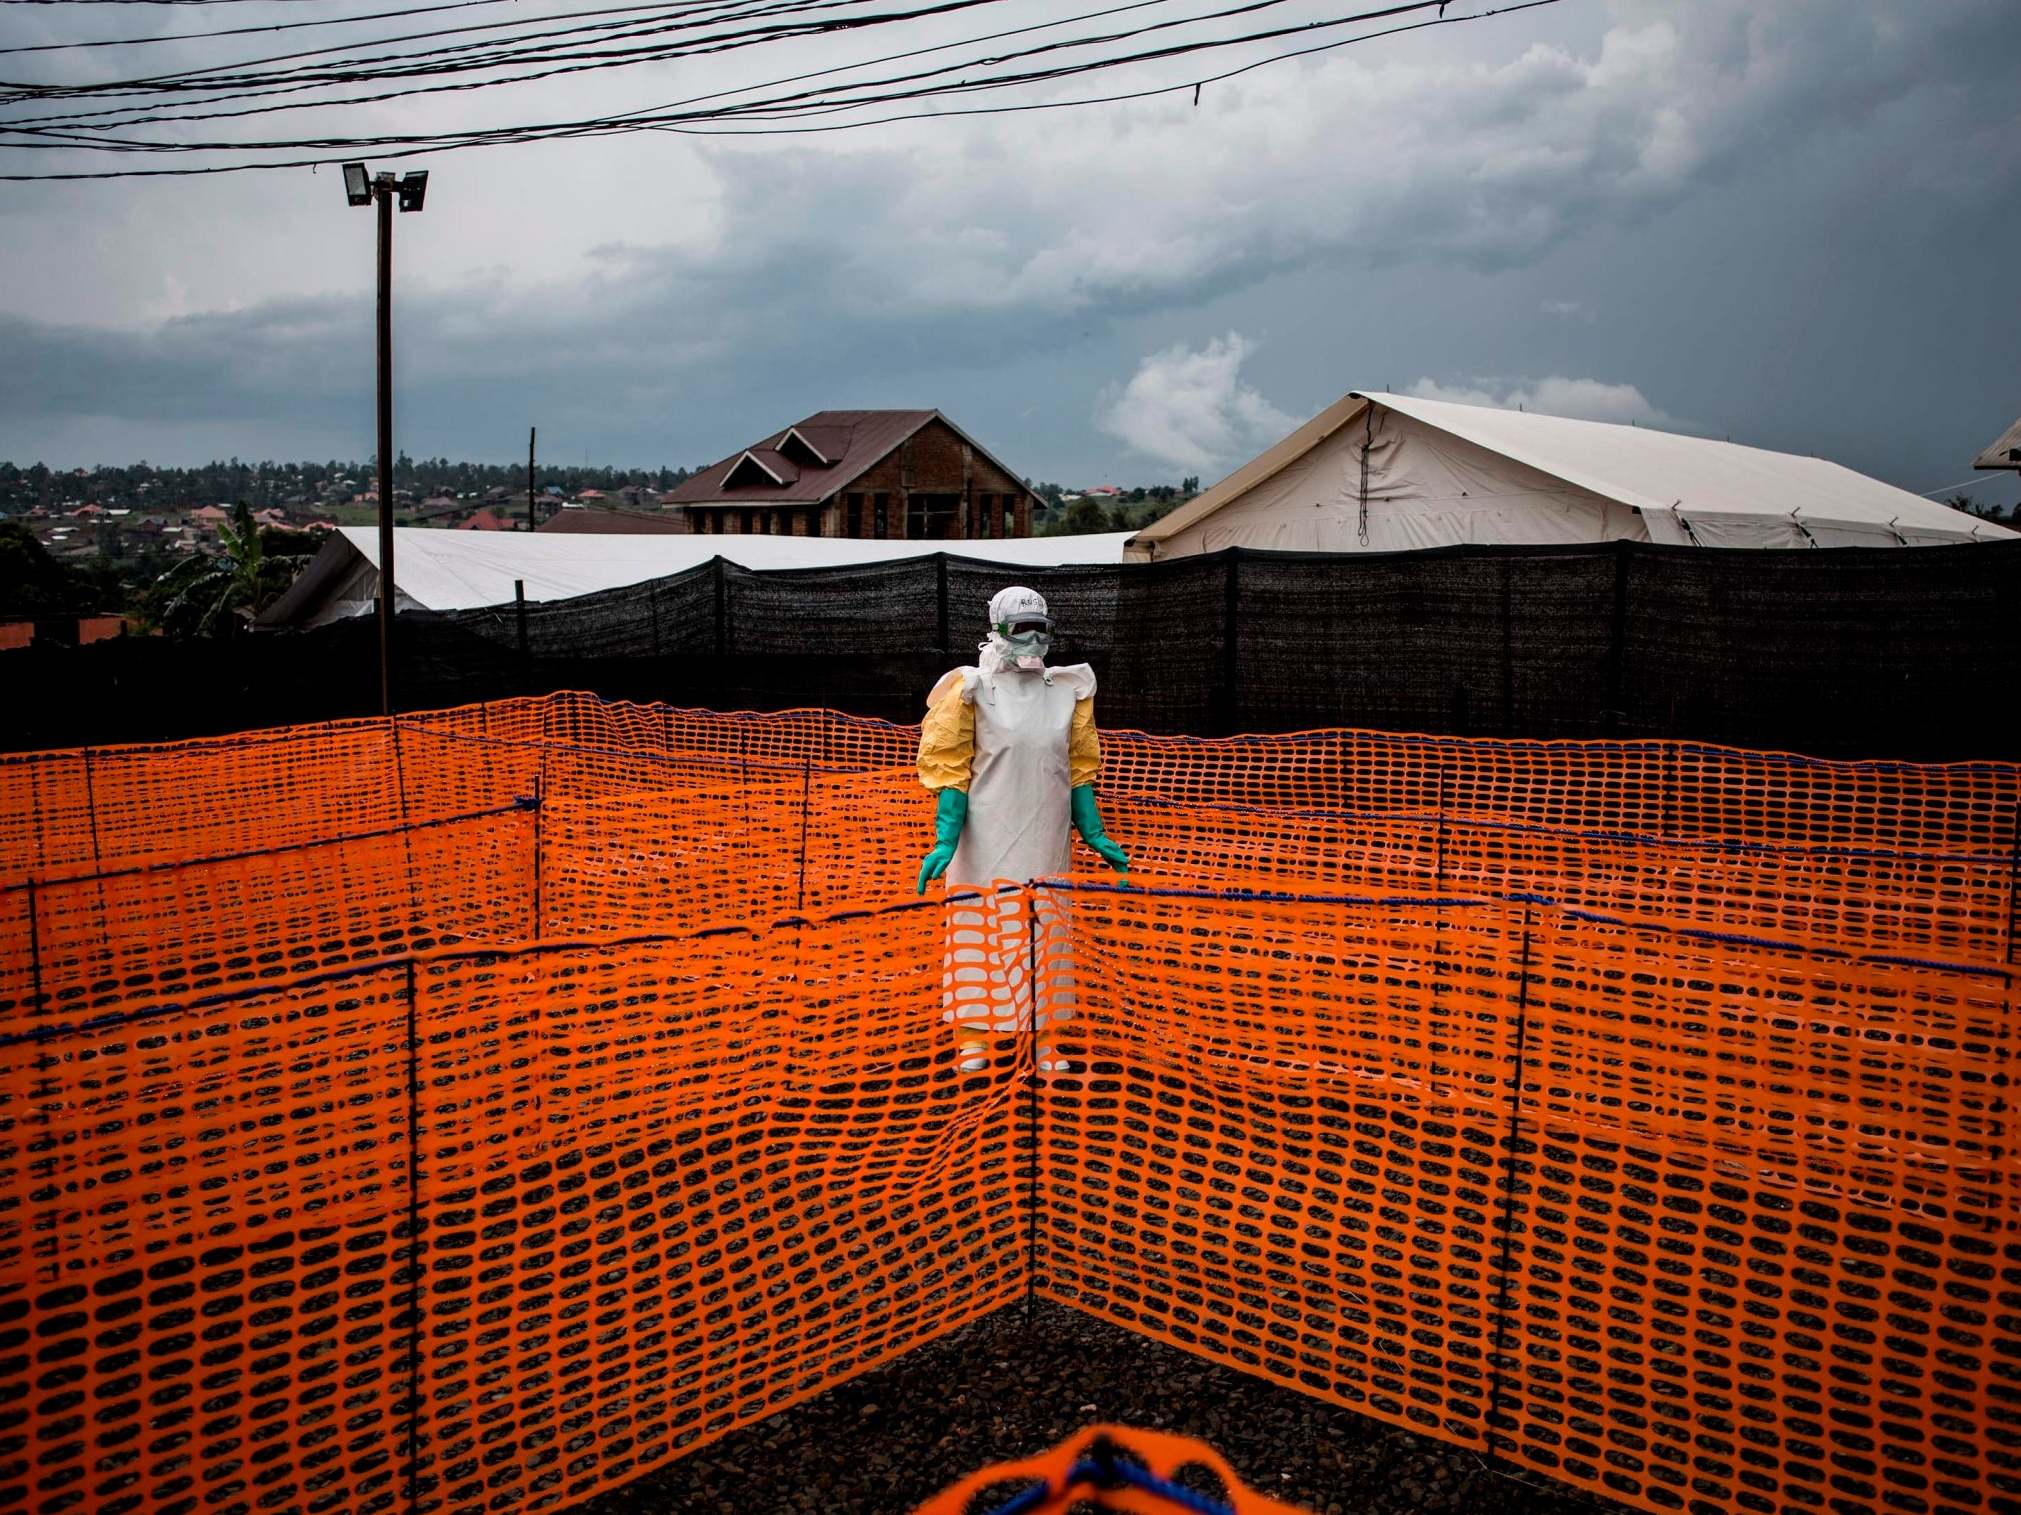 A health worker waits to handle a new unconfirmed Ebola patient at a Medicines Sans Frontiers treatment centre in the Democratic Republic of the Congo in 2018